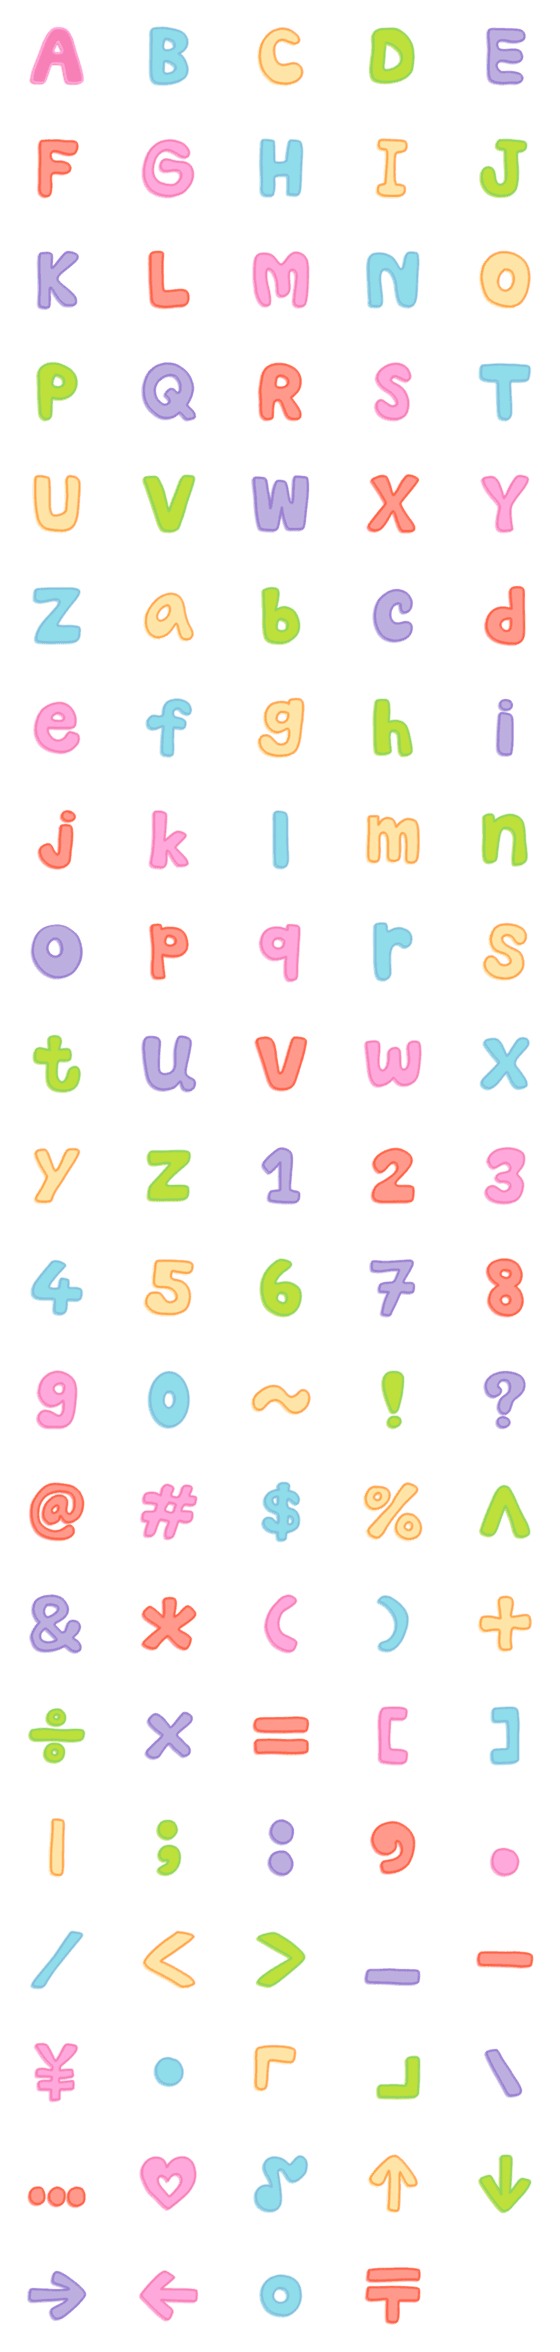 [LINE絵文字]The colored letters and numbers cuteの画像一覧